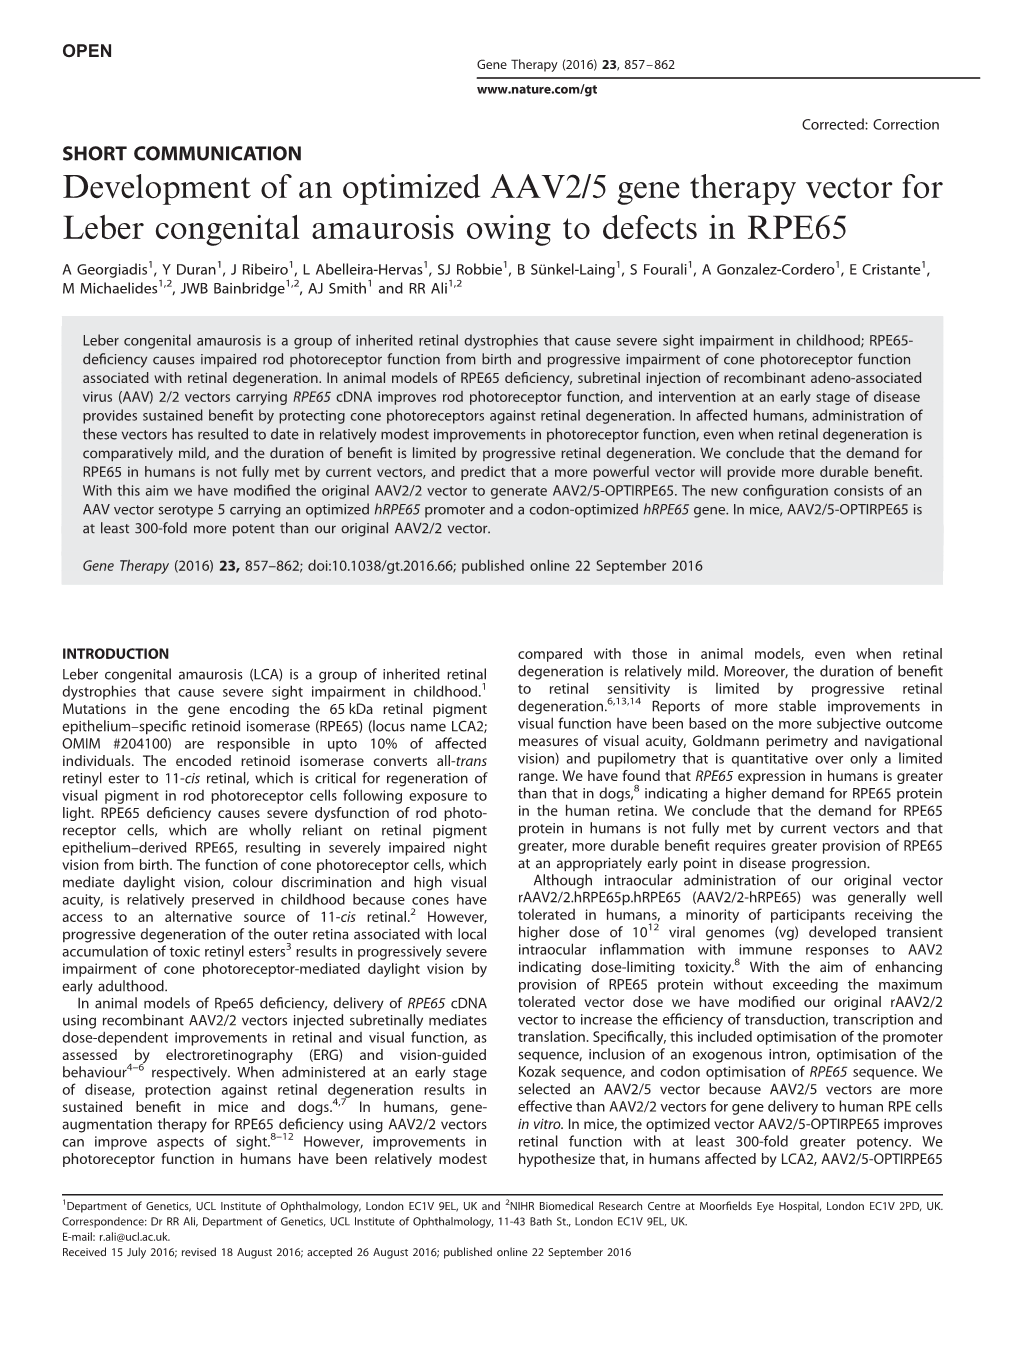 Development of an Optimized AAV2/5 Gene Therapy Vector for Leber Congenital Amaurosis Owing to Defects in RPE65